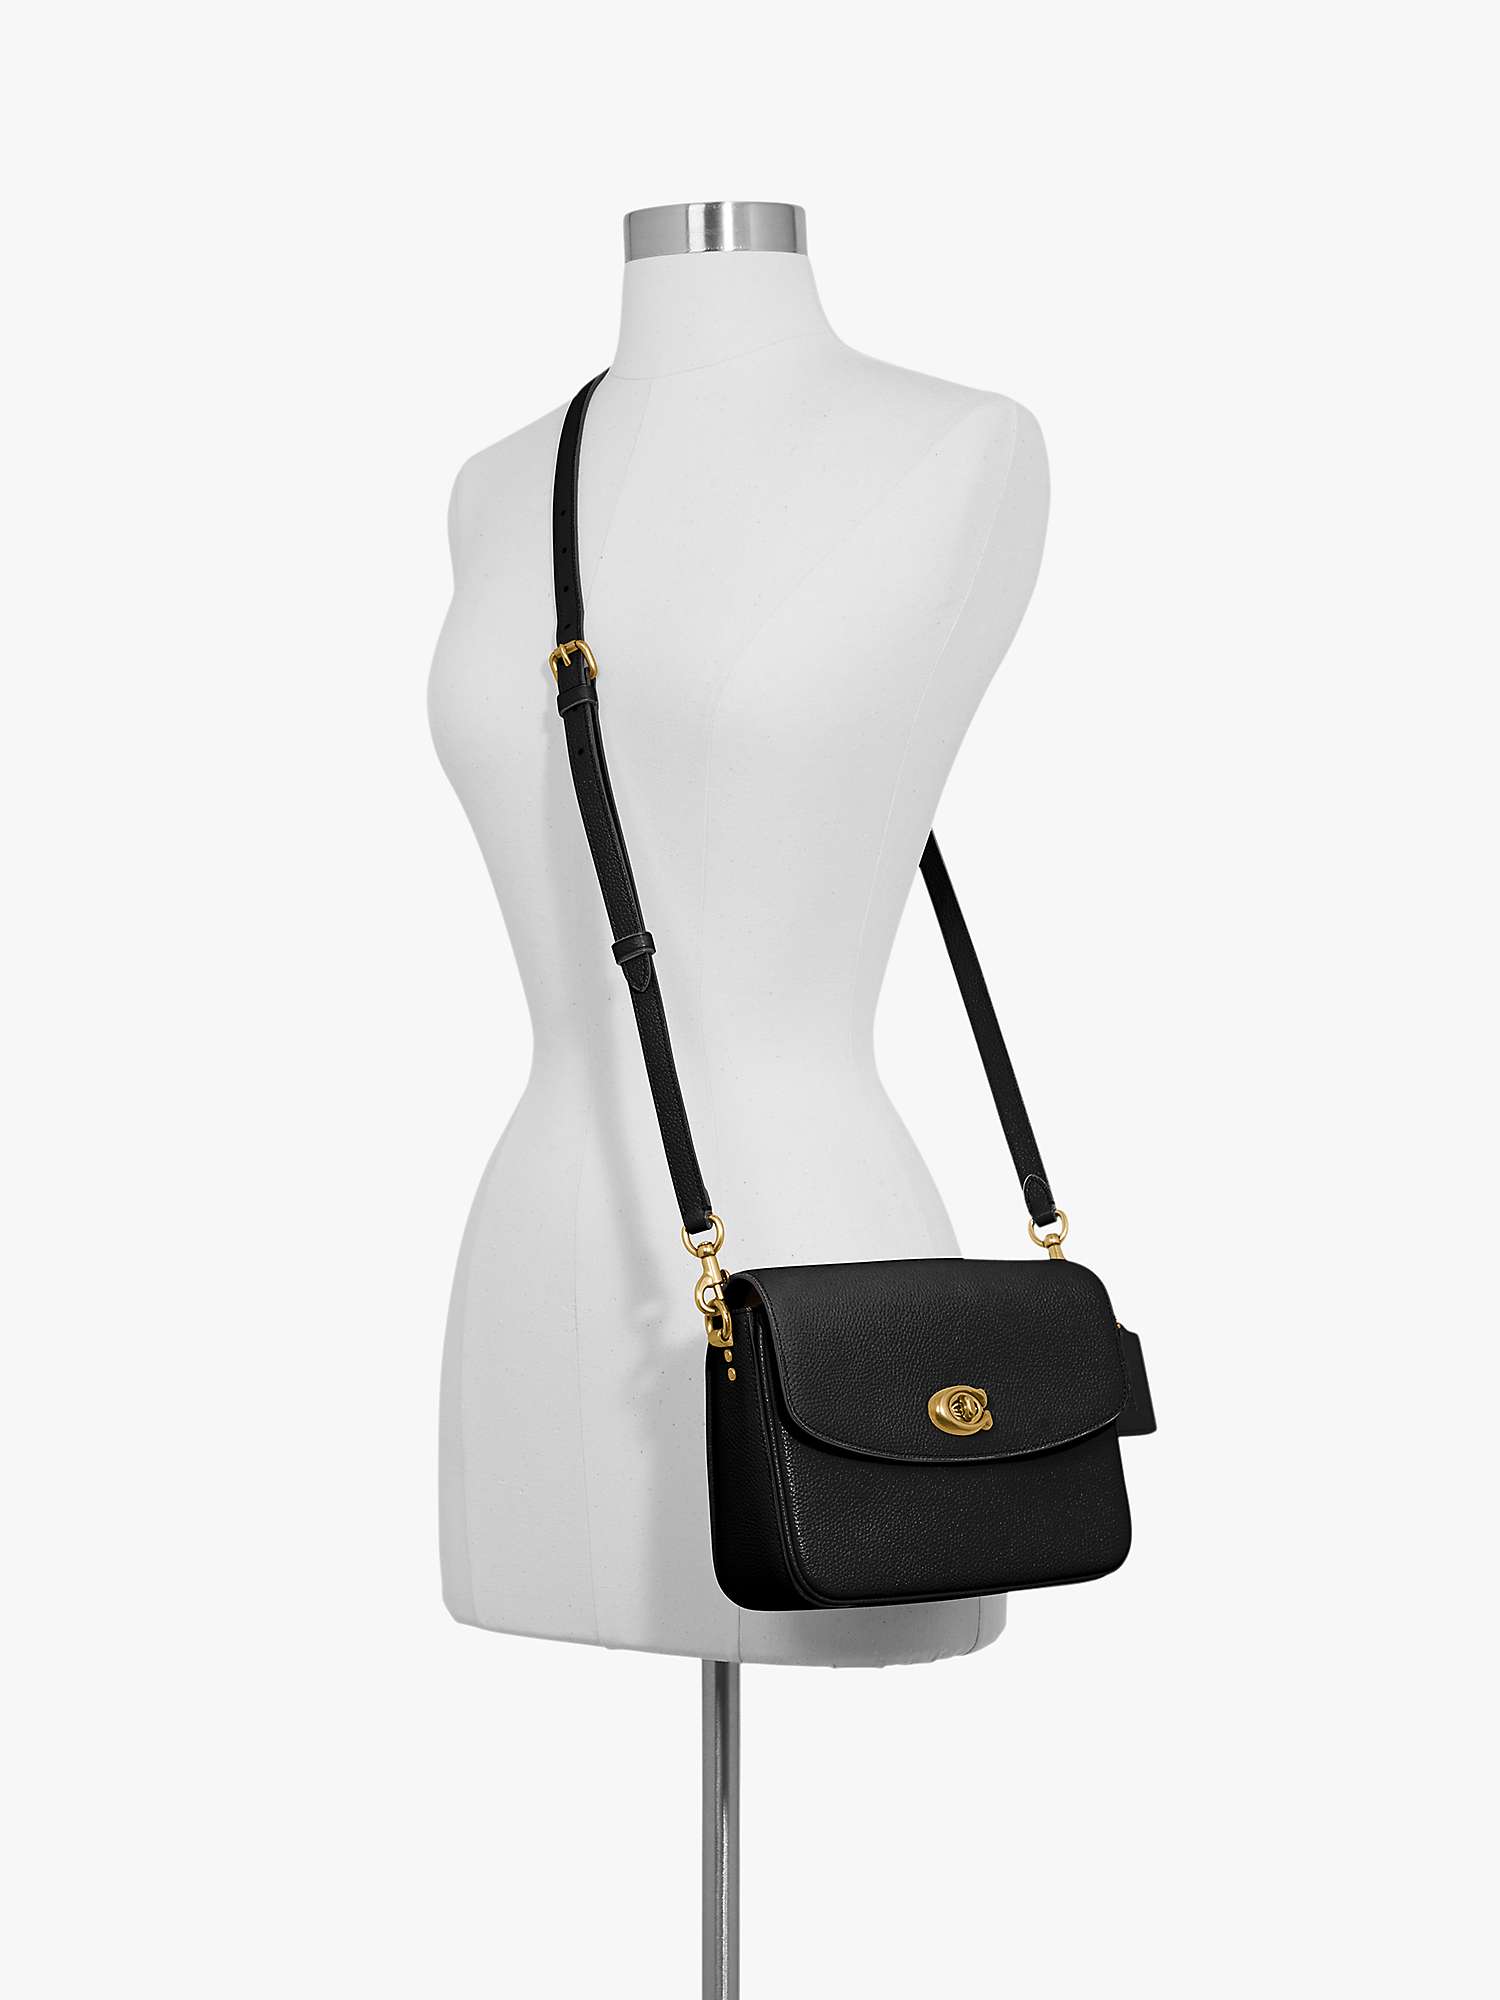 Buy Coach Cassie 19 Leather Cross Body Bag Online at johnlewis.com